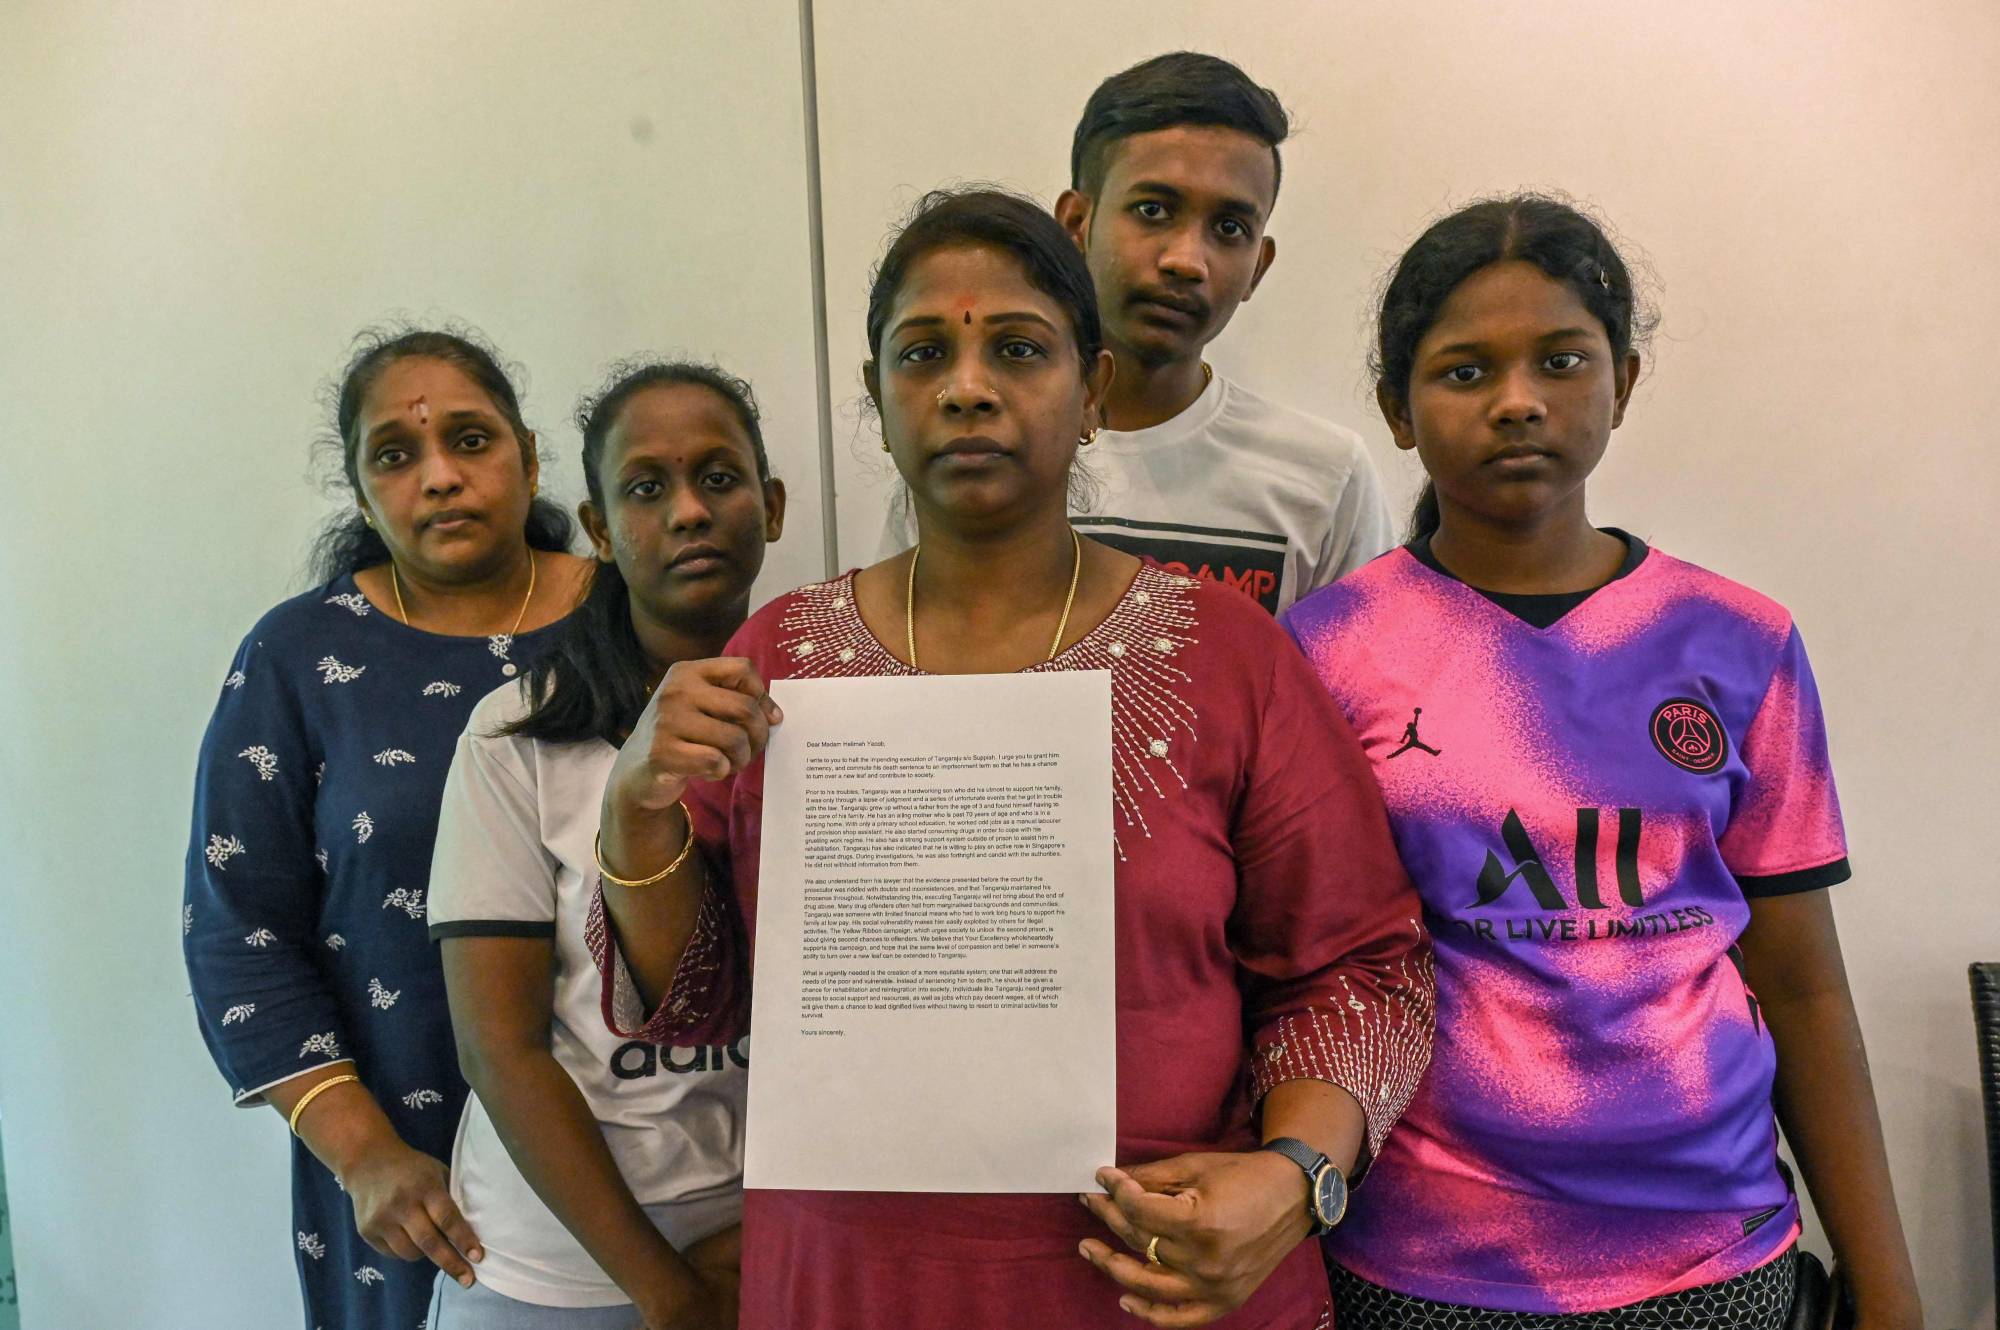 Family members of Tangaraju Suppiah, who is scheduled for execution in Singapore after being convicted of drug trafficking, show off a petition letter seeking clemency, on Sunday. | AFP-JIJI